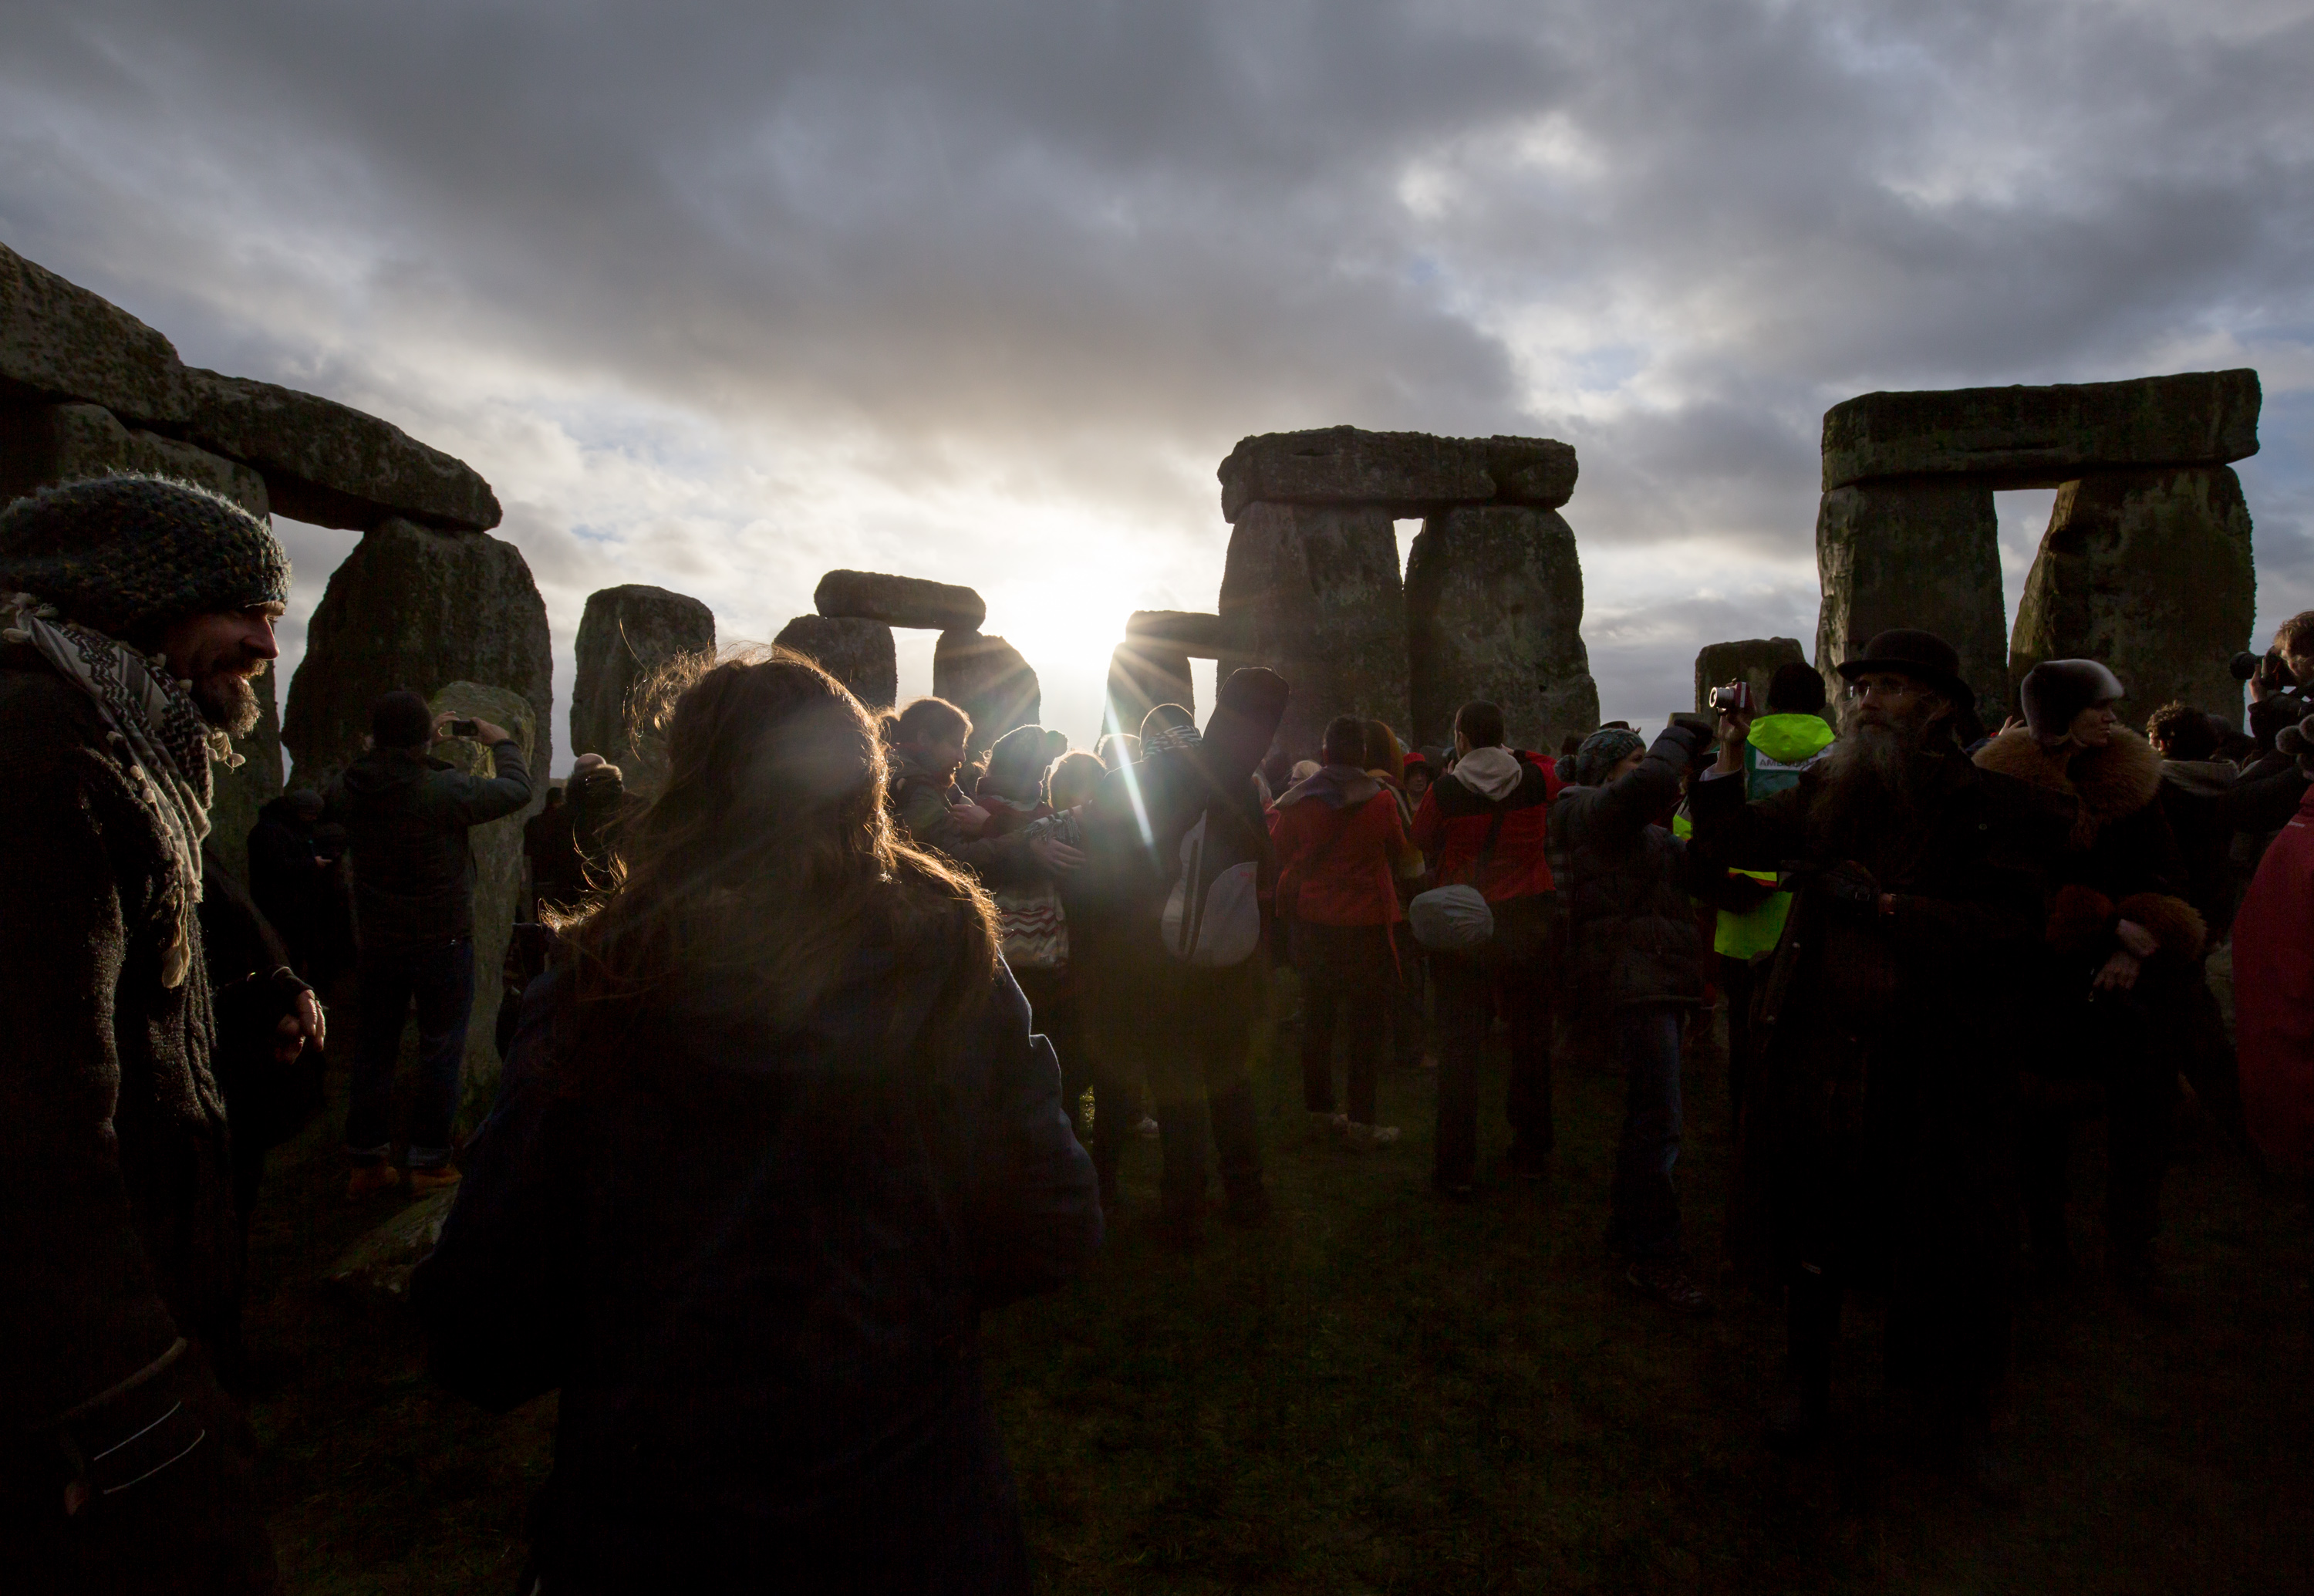 The sun makes a brief appearance through clouds as druids, pagans and revelers gather in the centre of Stonehenge in Wiltshire, England for the 2015 winter solstice. (Matt Cardy—Getty Images)